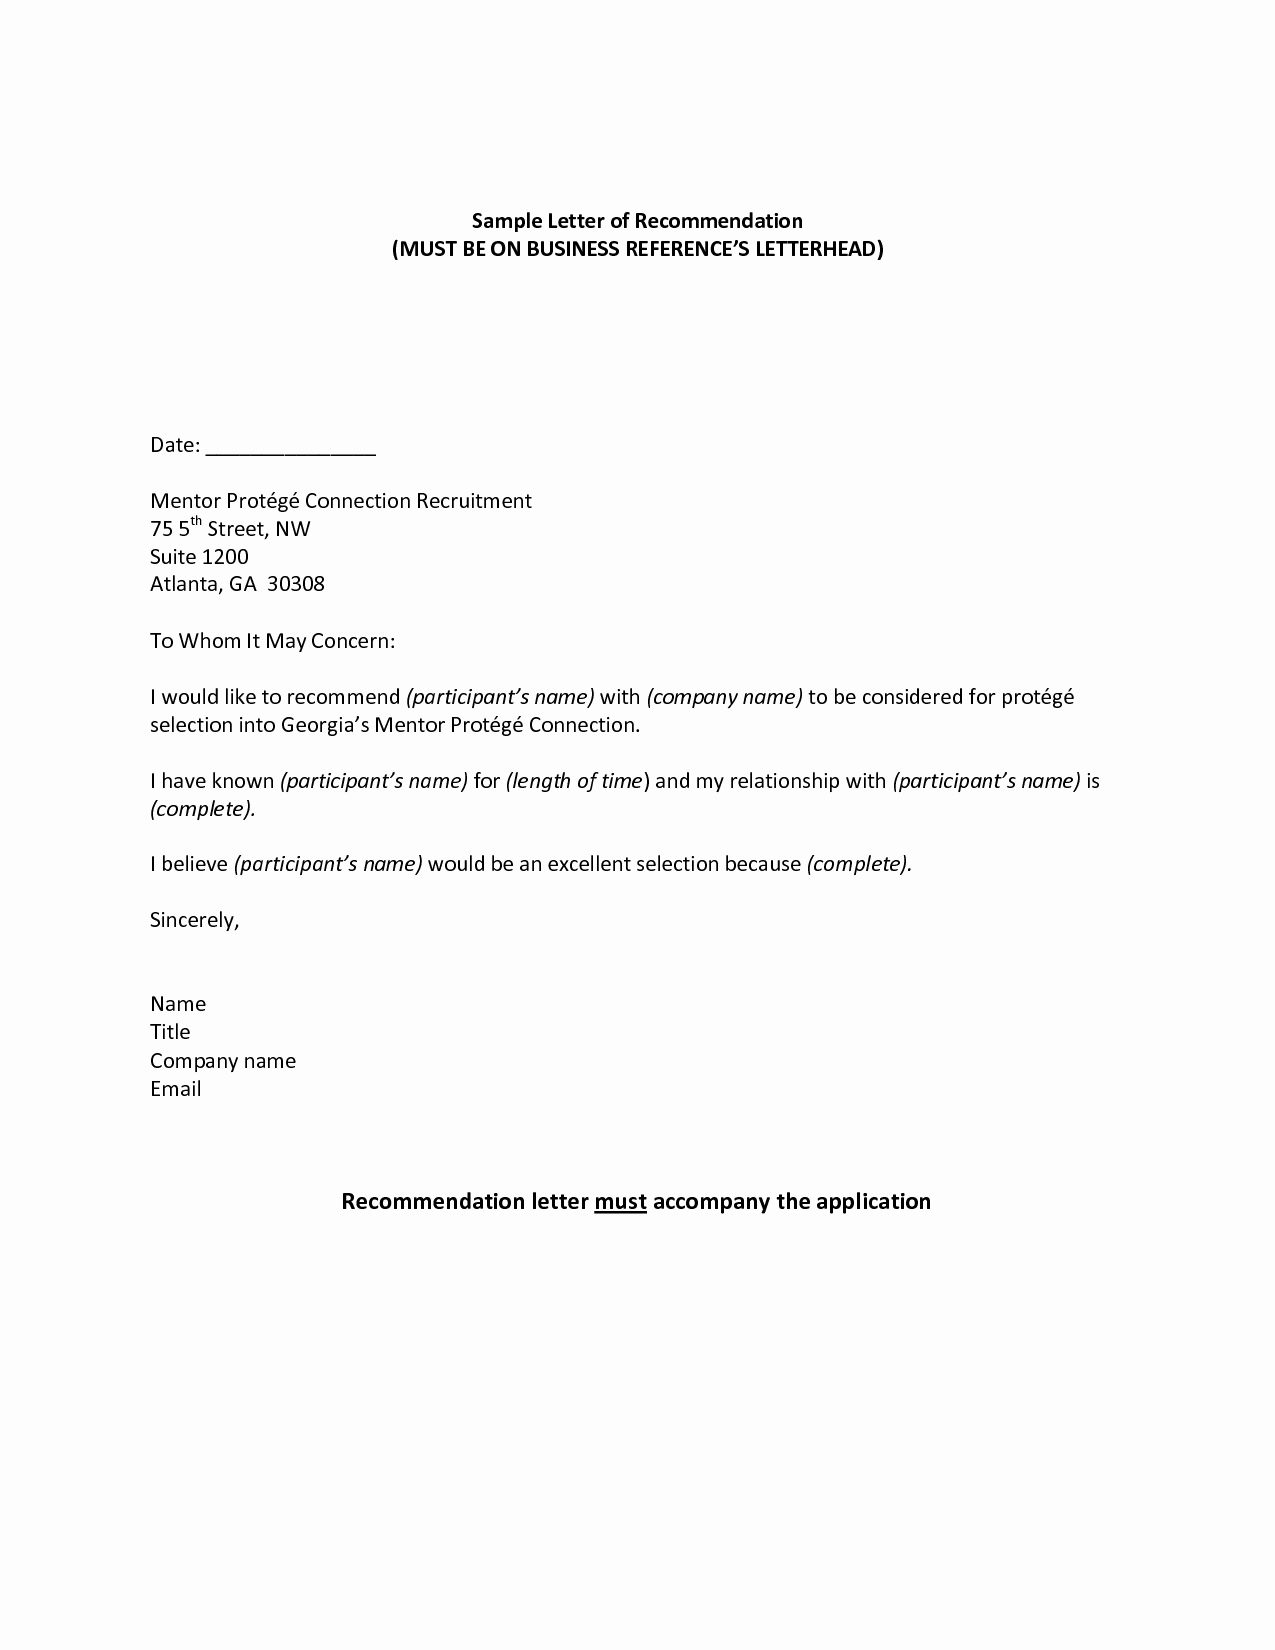 Example Of A Recommendation Letter Beautiful Professional Reference Sample Re Mendation Letter Jos